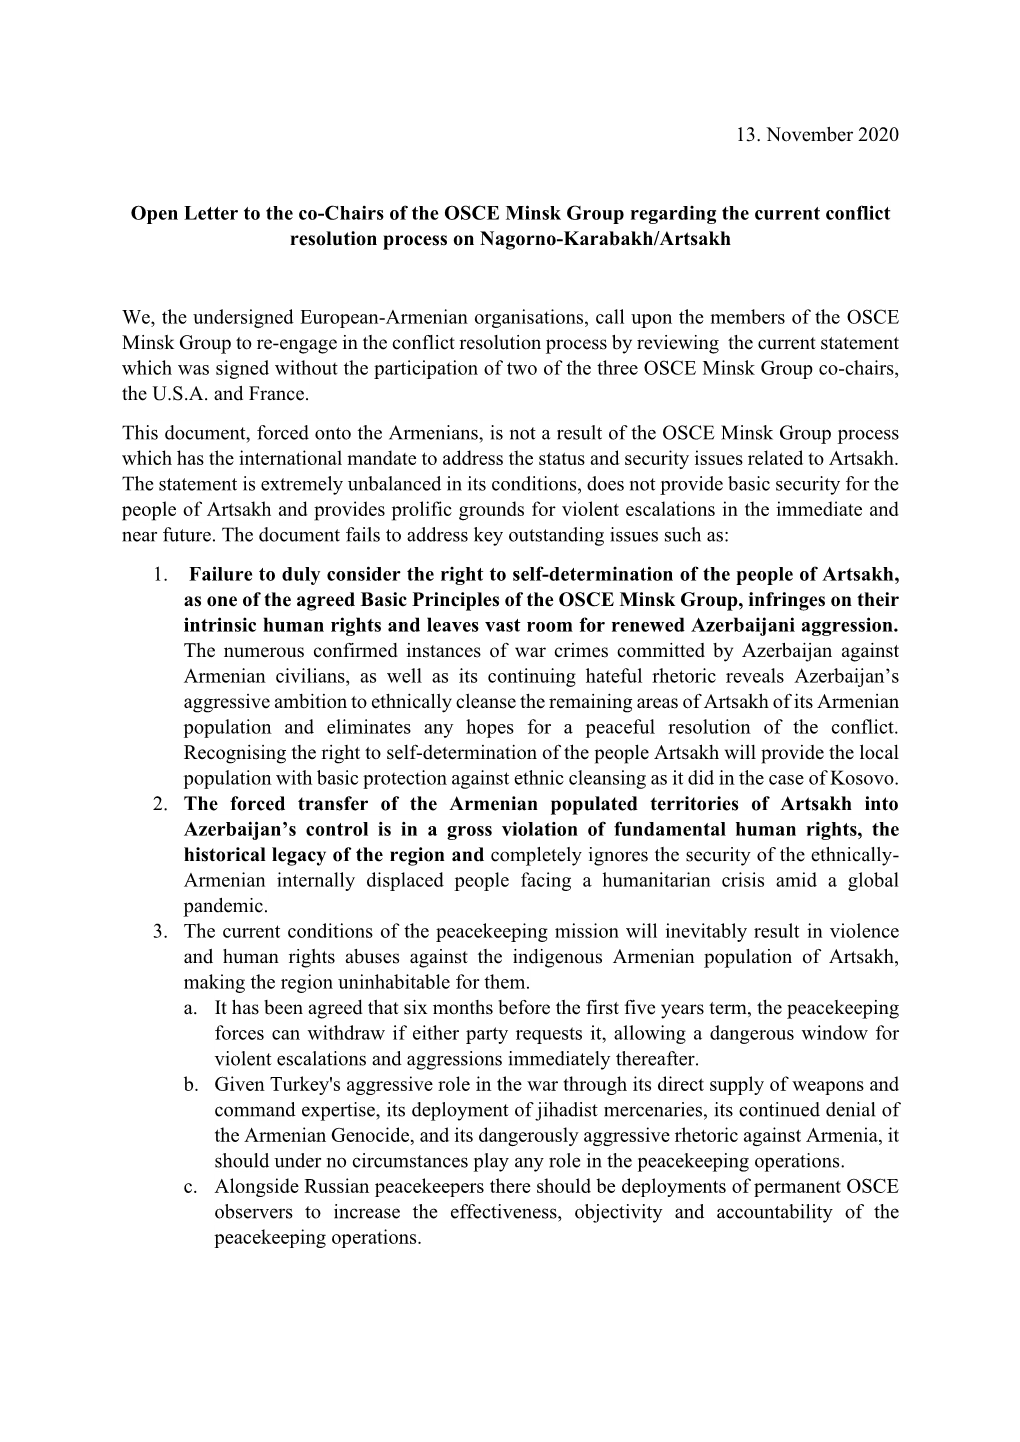 13. November 2020 Open Letter to the Co-Chairs of the OSCE Minsk